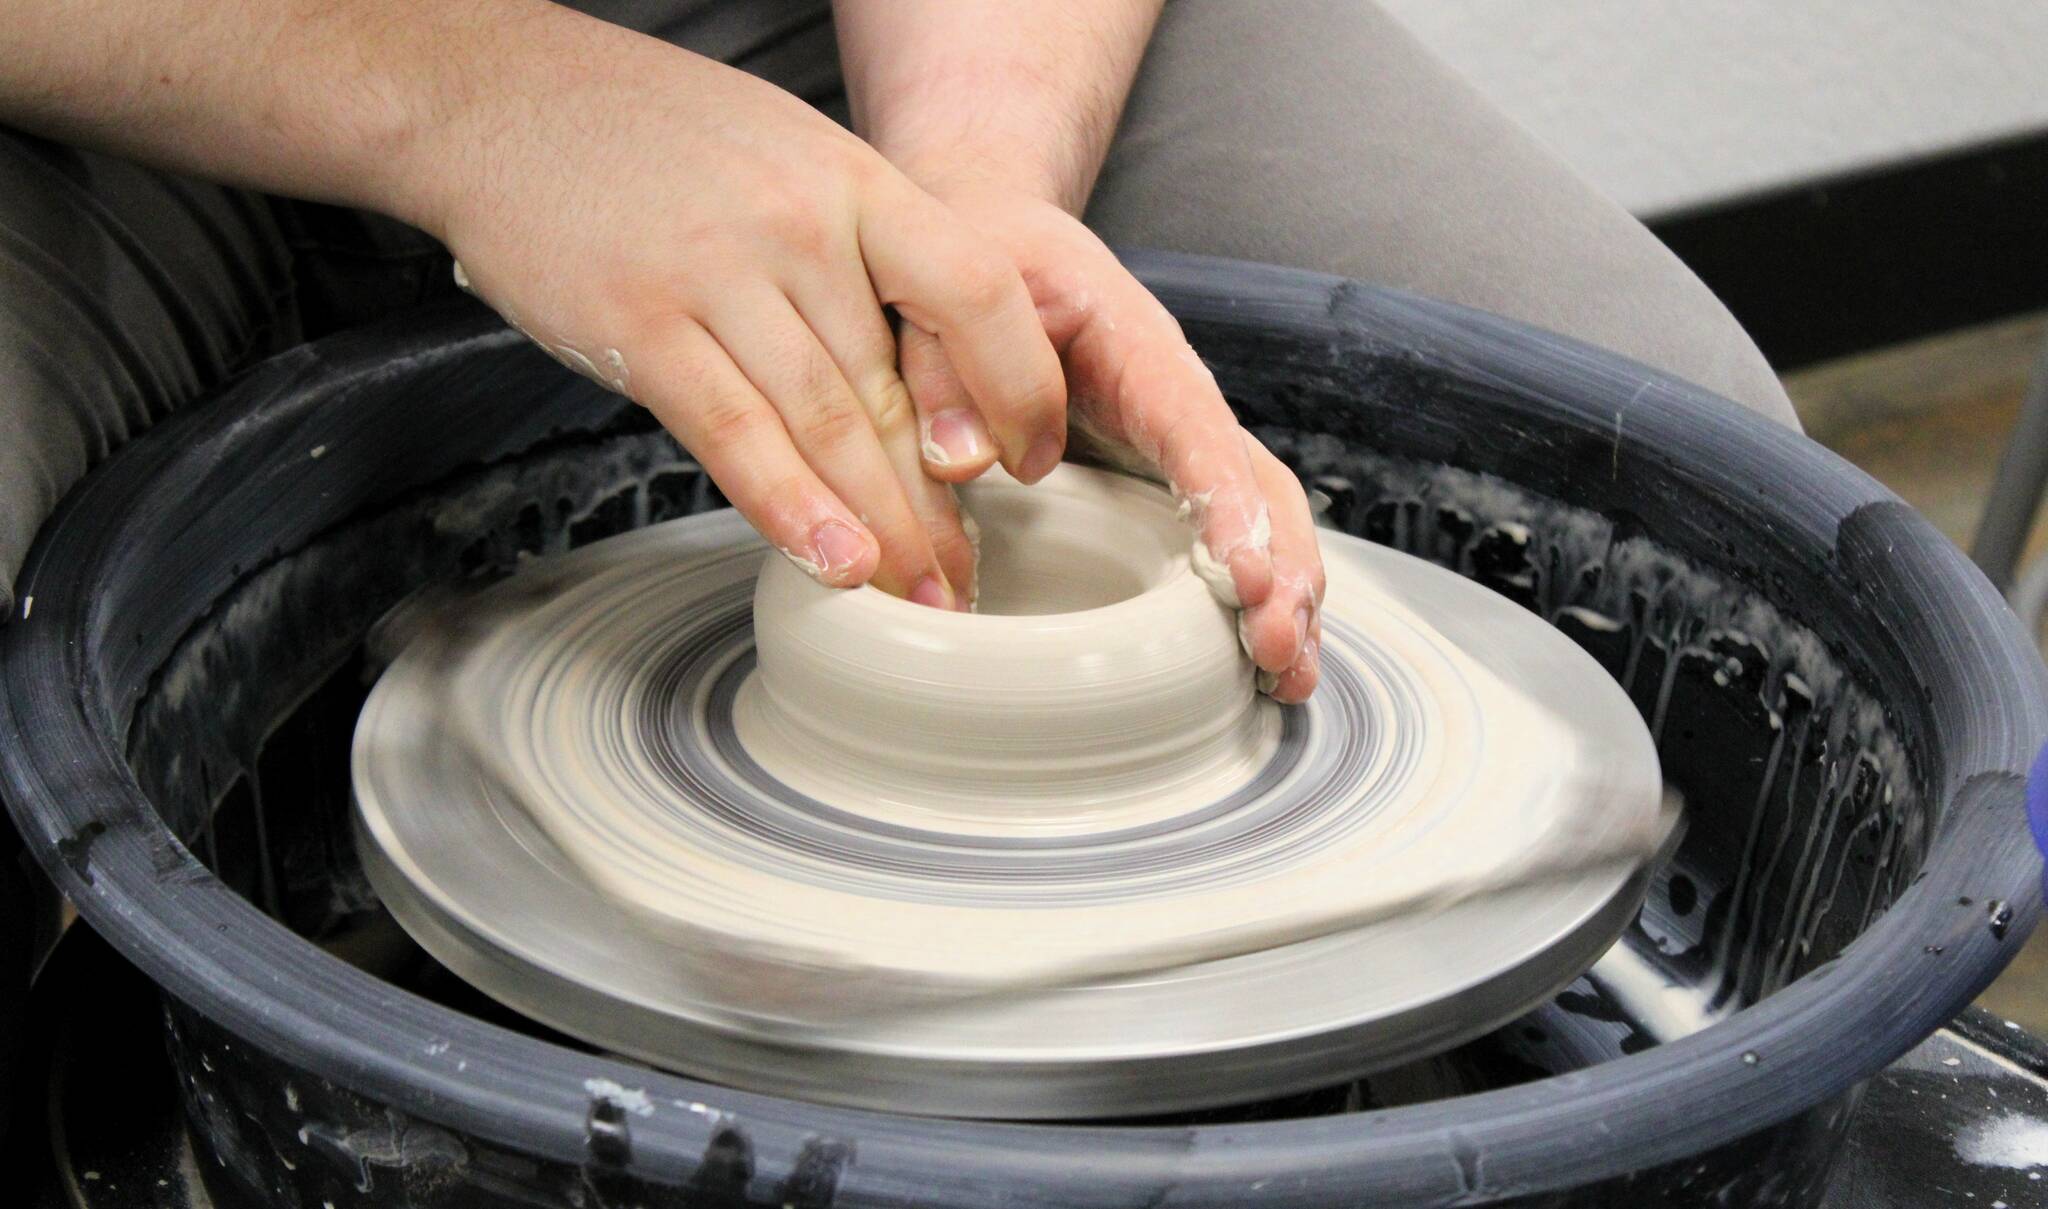 Elisha Meyer/Kitsap News Group Photos
The hands of Jacob Cowan shape the clay on a spinning wheel in his new pottery studio in Port Orchard.